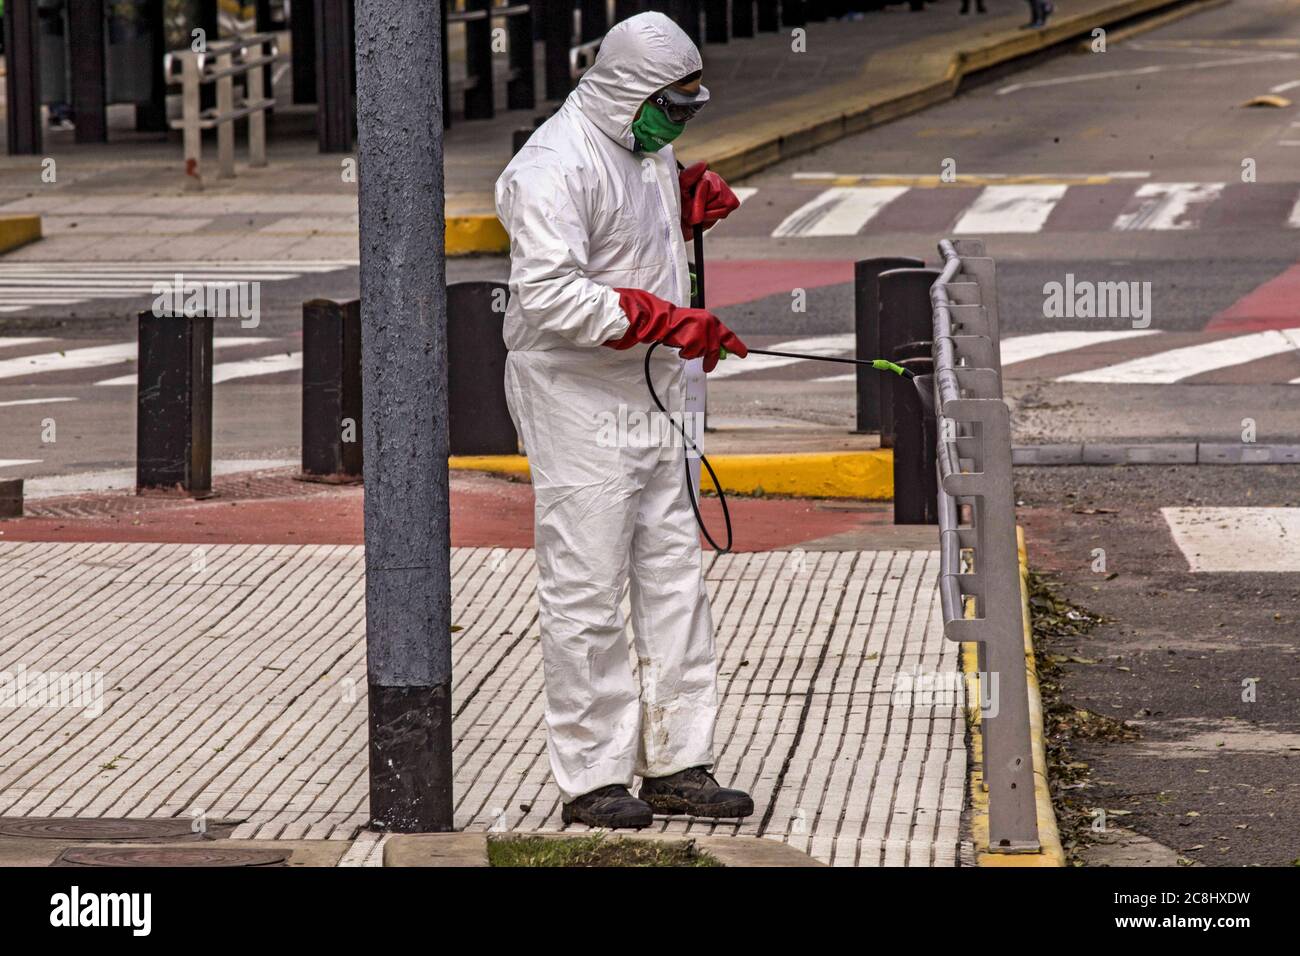 July 24, 2020, Buenos Aires, Federal Capital, Argentina: After the record of infections registered this week in Argentina, the Minister of Health of the Nation, Dr. Ginés GonzÃ¡lez GarcÃ-a, said he was concerned and pointed out those who did not abide by social isolation in the correct way and emphasized the responsibility of those who do not comply with the preventive measures ordered by the government. He attributed the great rise in contagion to social indiscipline, clandestine gatherings, recklessness and failure to comply with social distancing. Credit: ZUMA Press, Inc./Alamy Live News Stock Photo